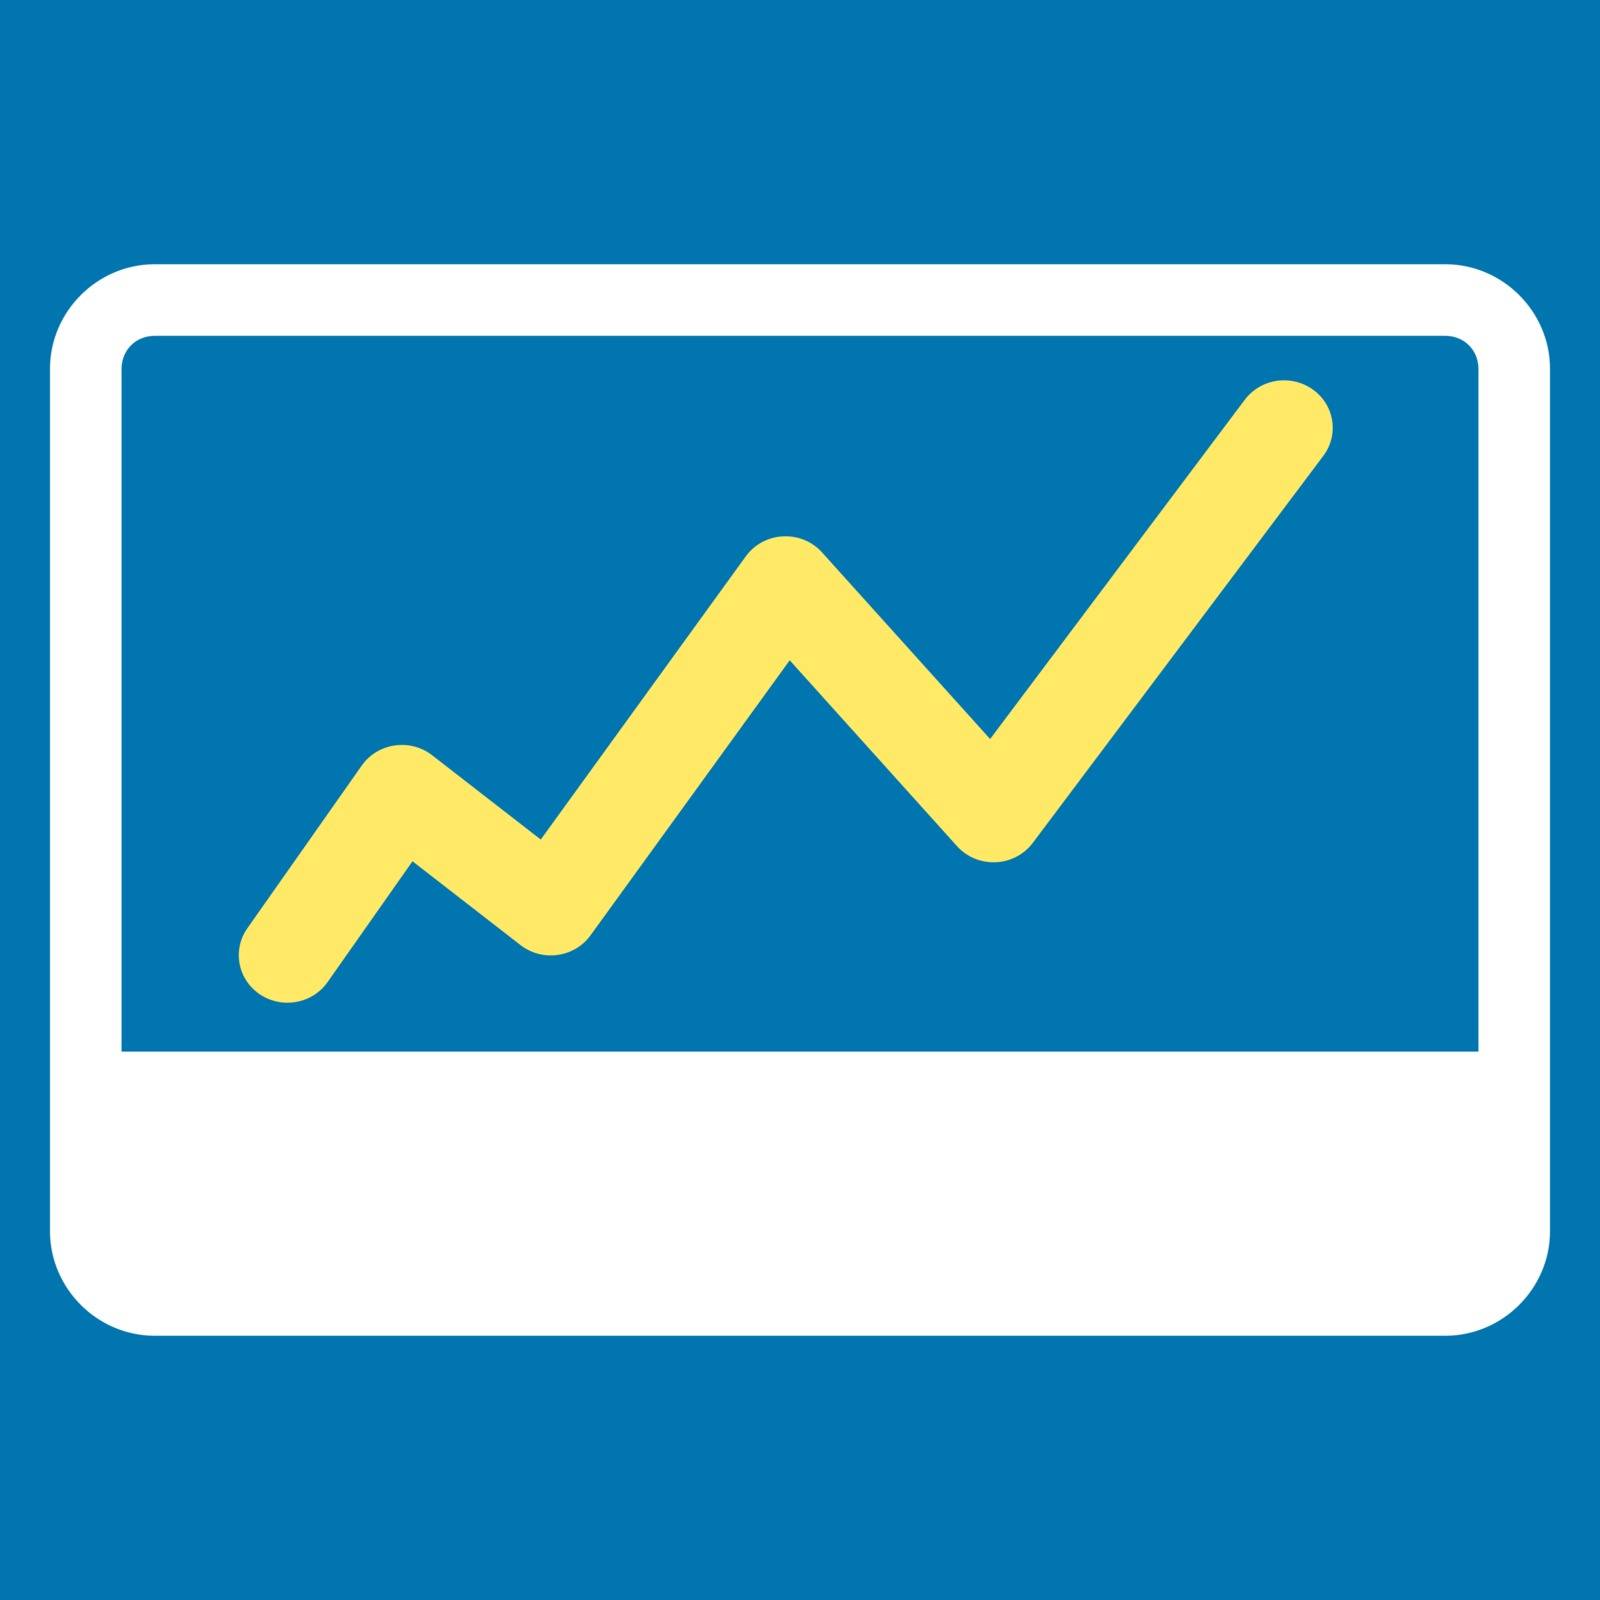 Stock Market icon by ahasoft